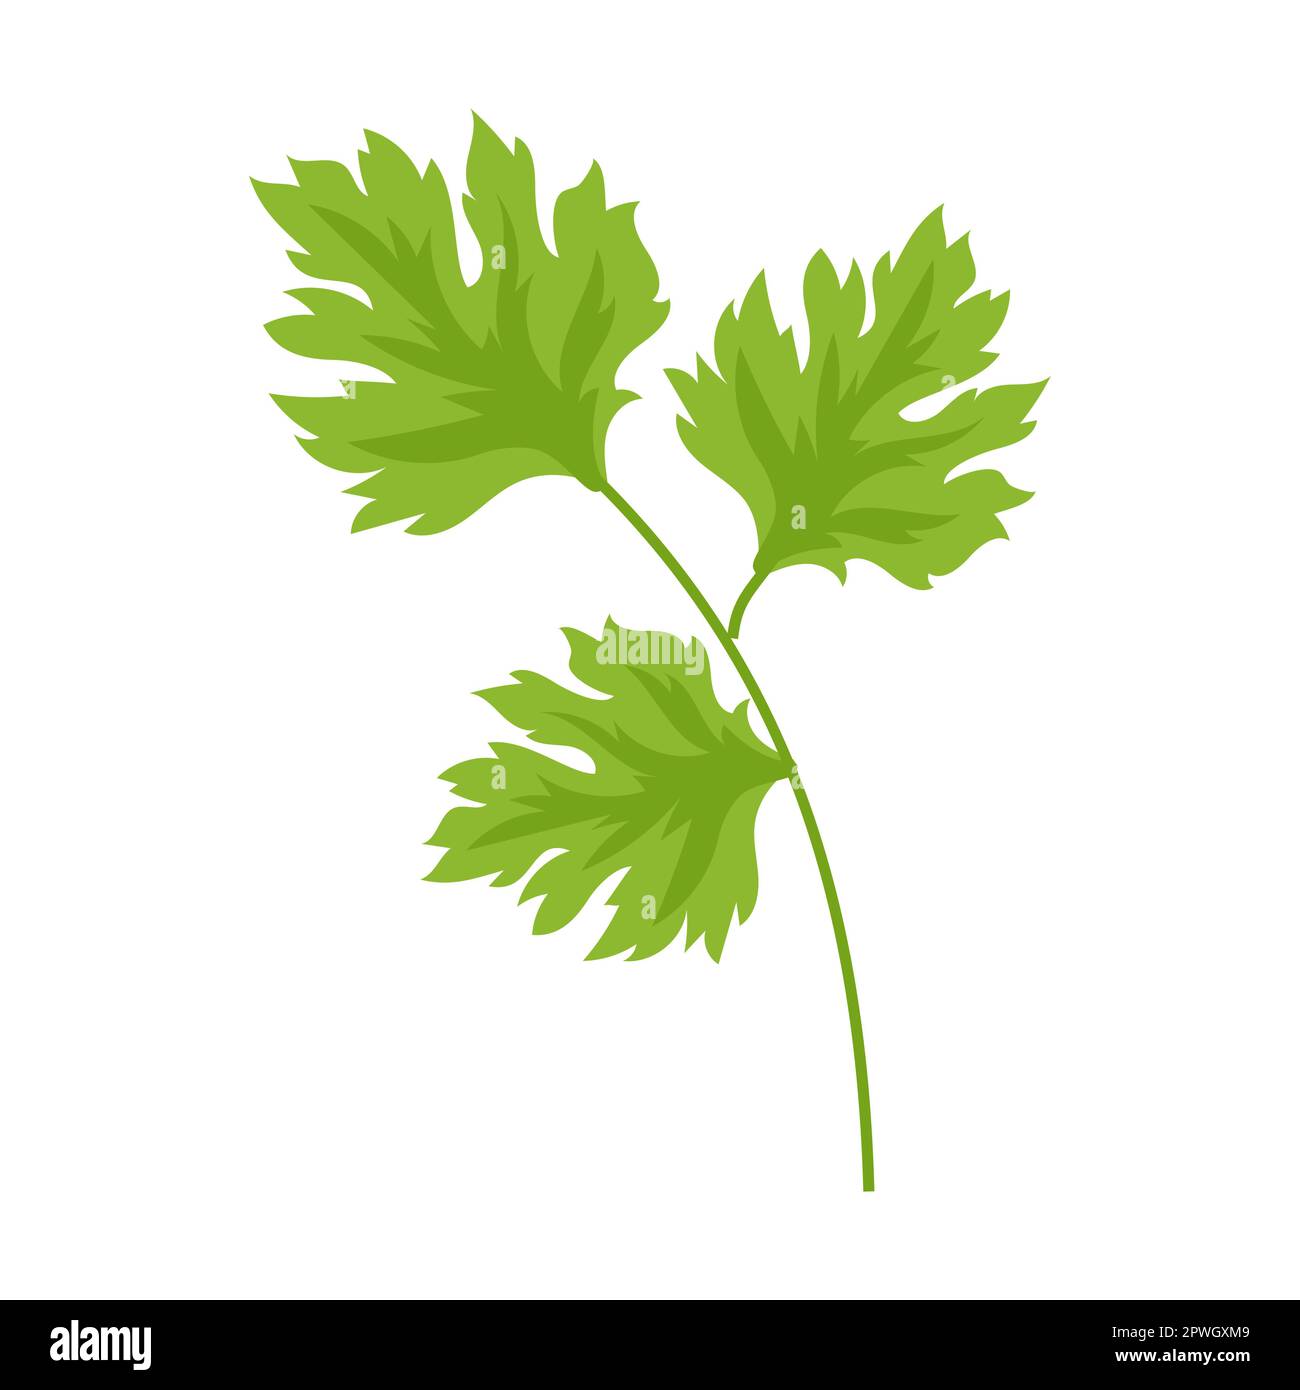 Parsley herb and leaves vector illustration. Spicy herbal plants, parsley, rosemary, coriander, oregano, mint on white background Stock Vector